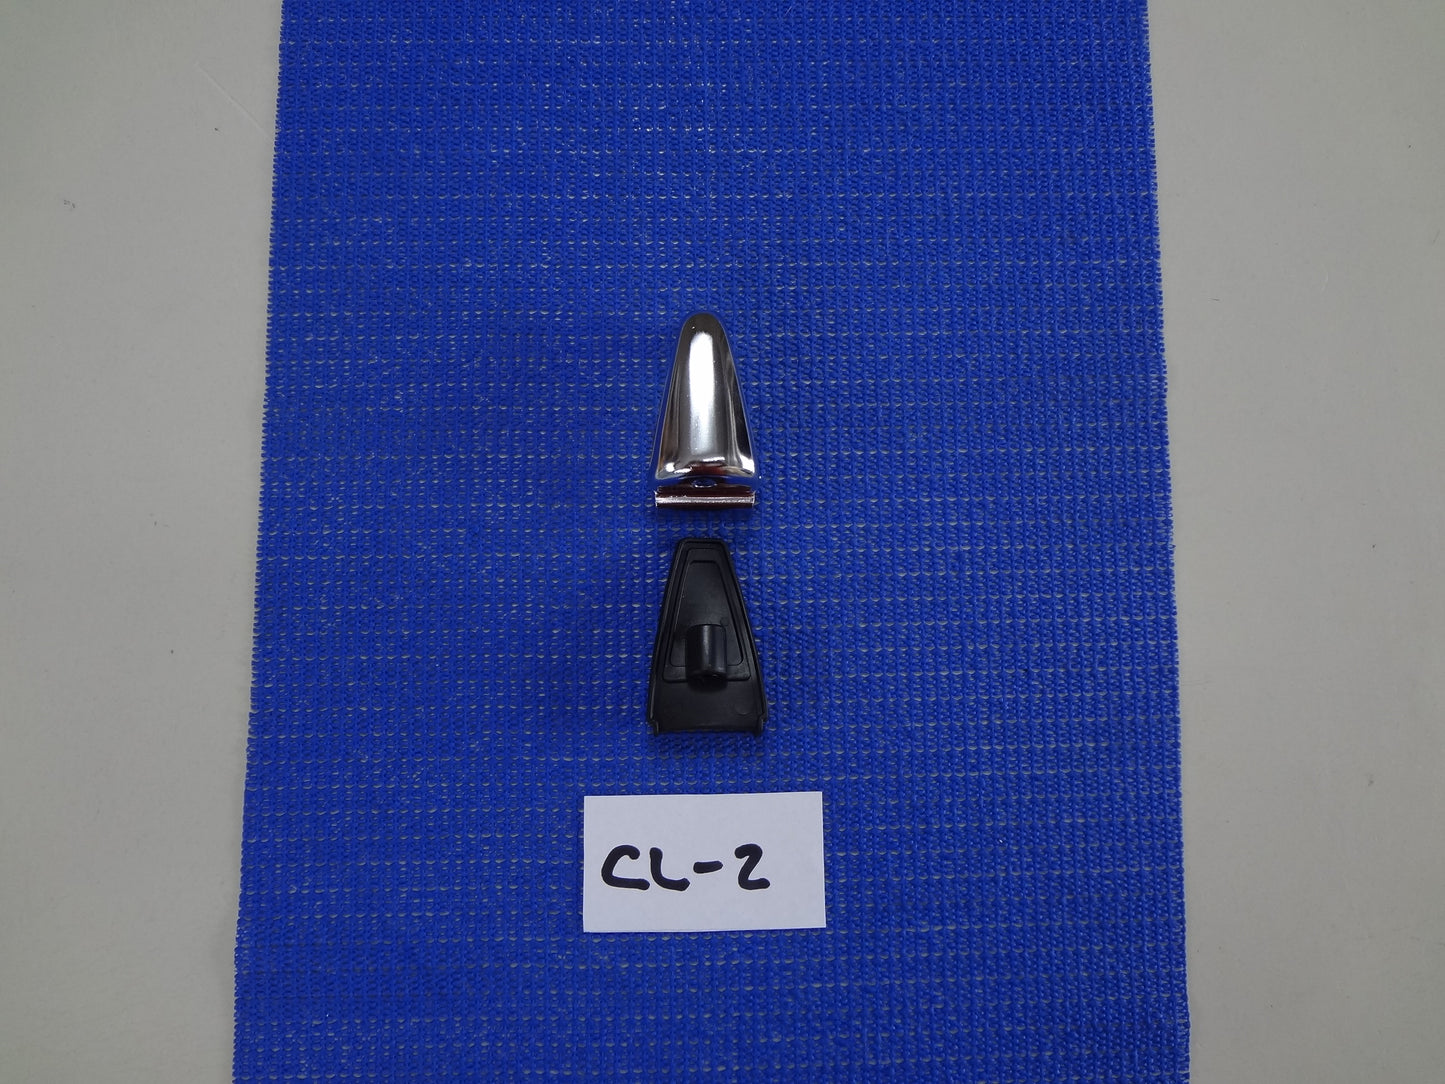 BASS DRUM CLAWS (16) CL-2